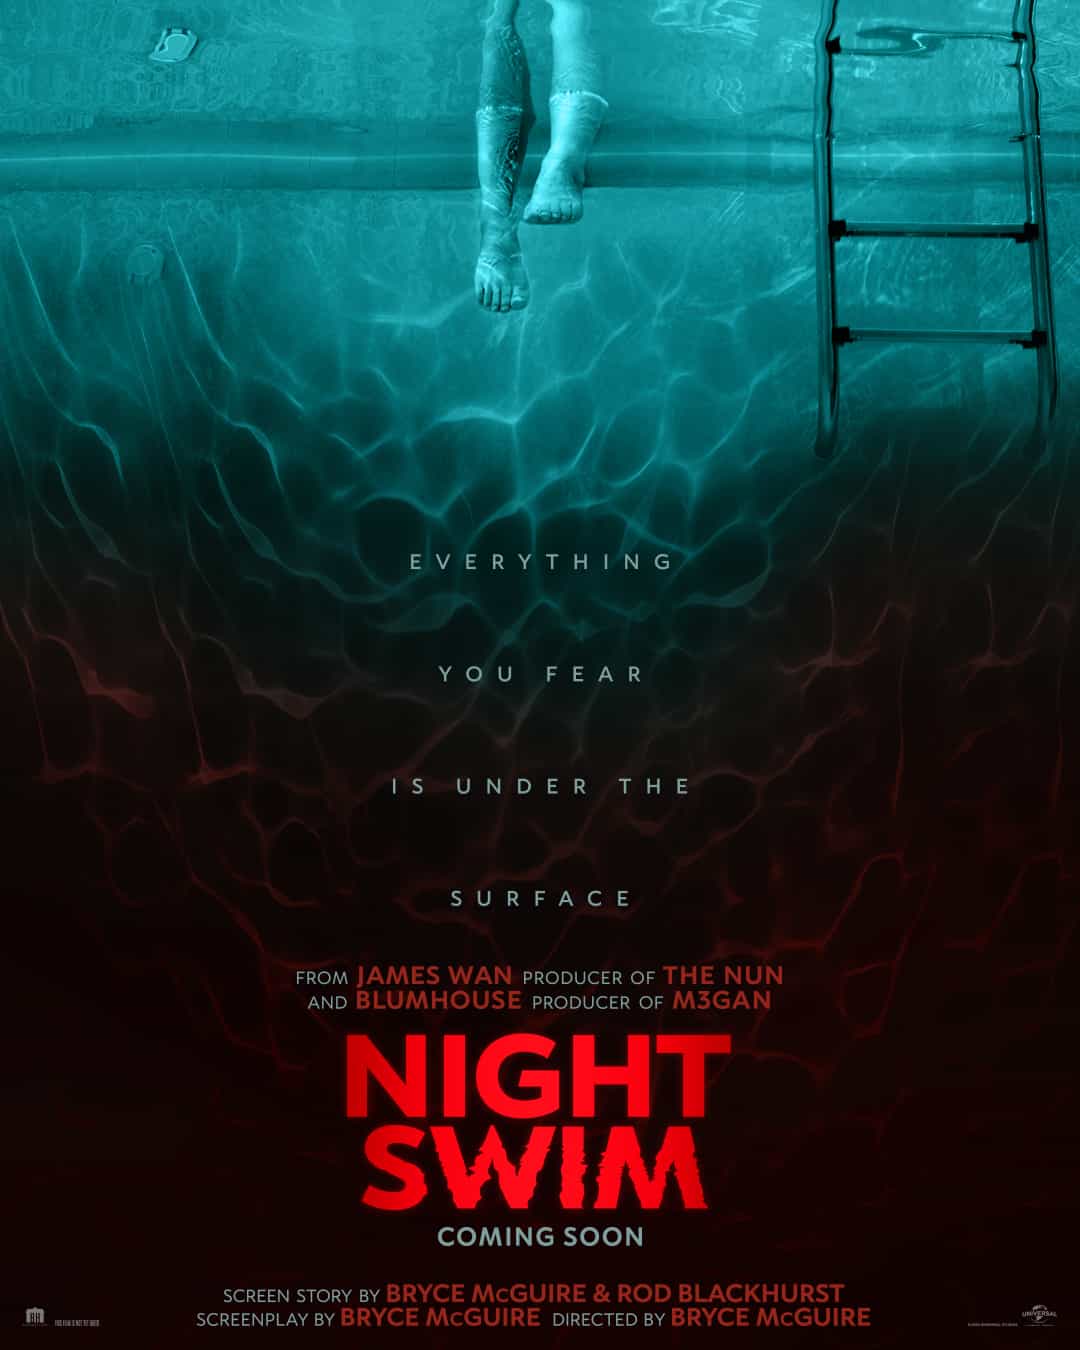 Night Swim is given a 15 age rating in the UK for strong horror